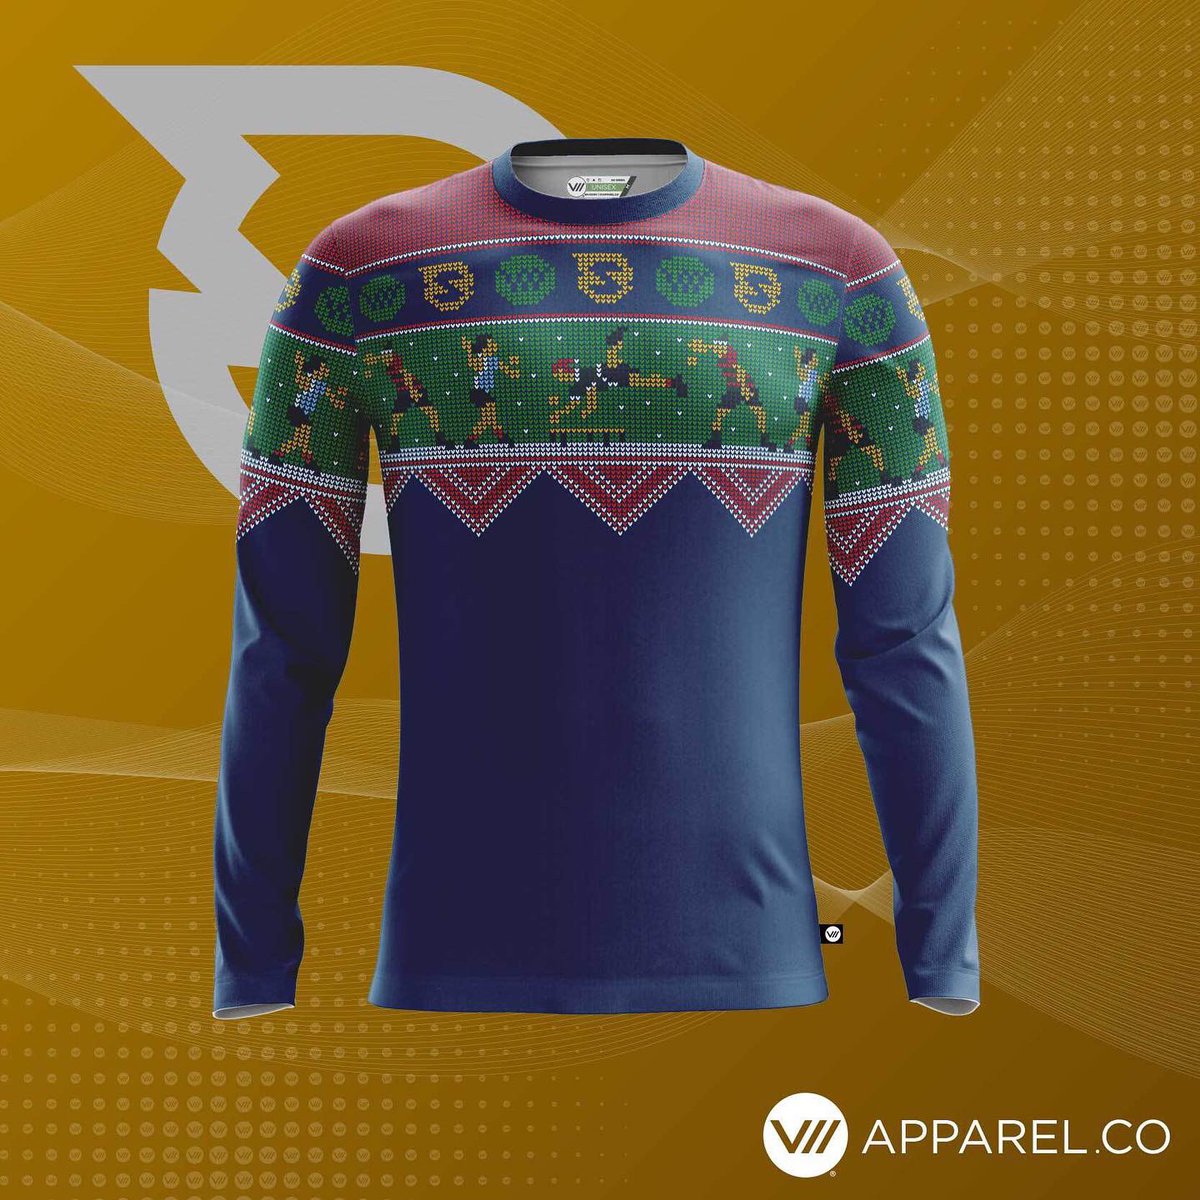 The new @spikeball ugly sweater jersey is on fire! Use code GIVIINGTHANKS for 40% off! viiapparel.co/products/spike…